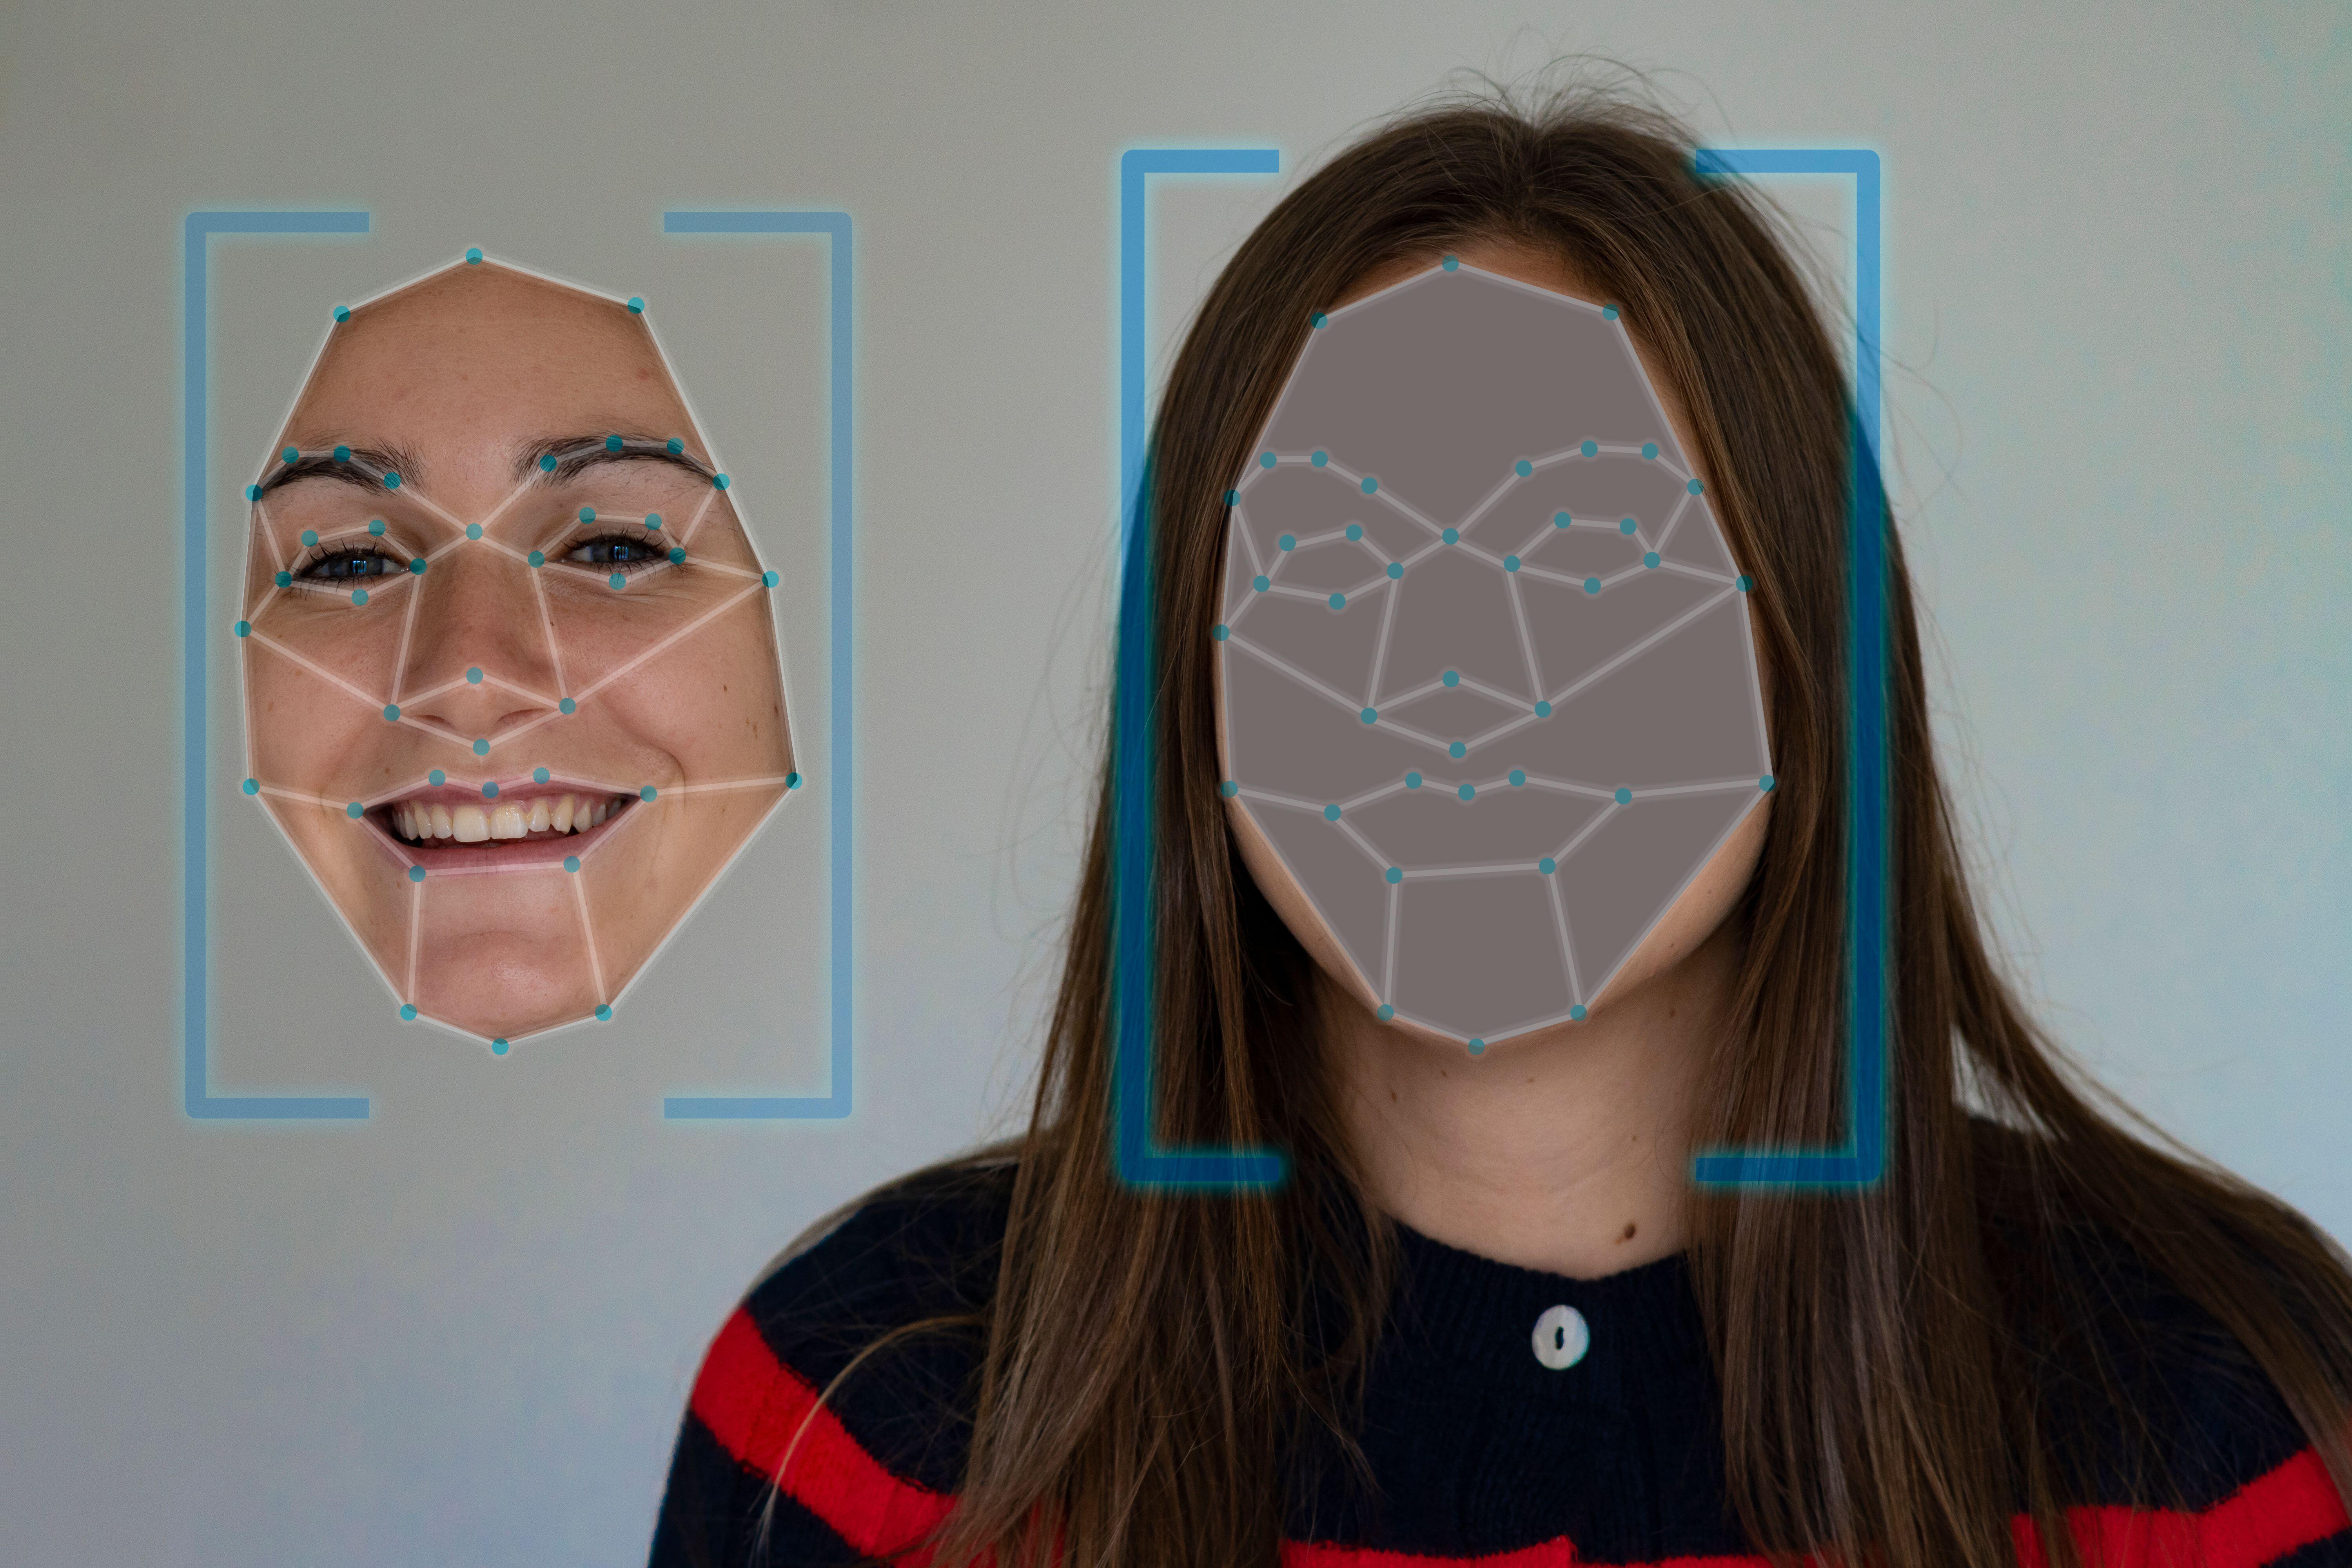 From Dark Reading – iOS, Android Malware Steals Faces to Defeat Biometrics With AI Swaps